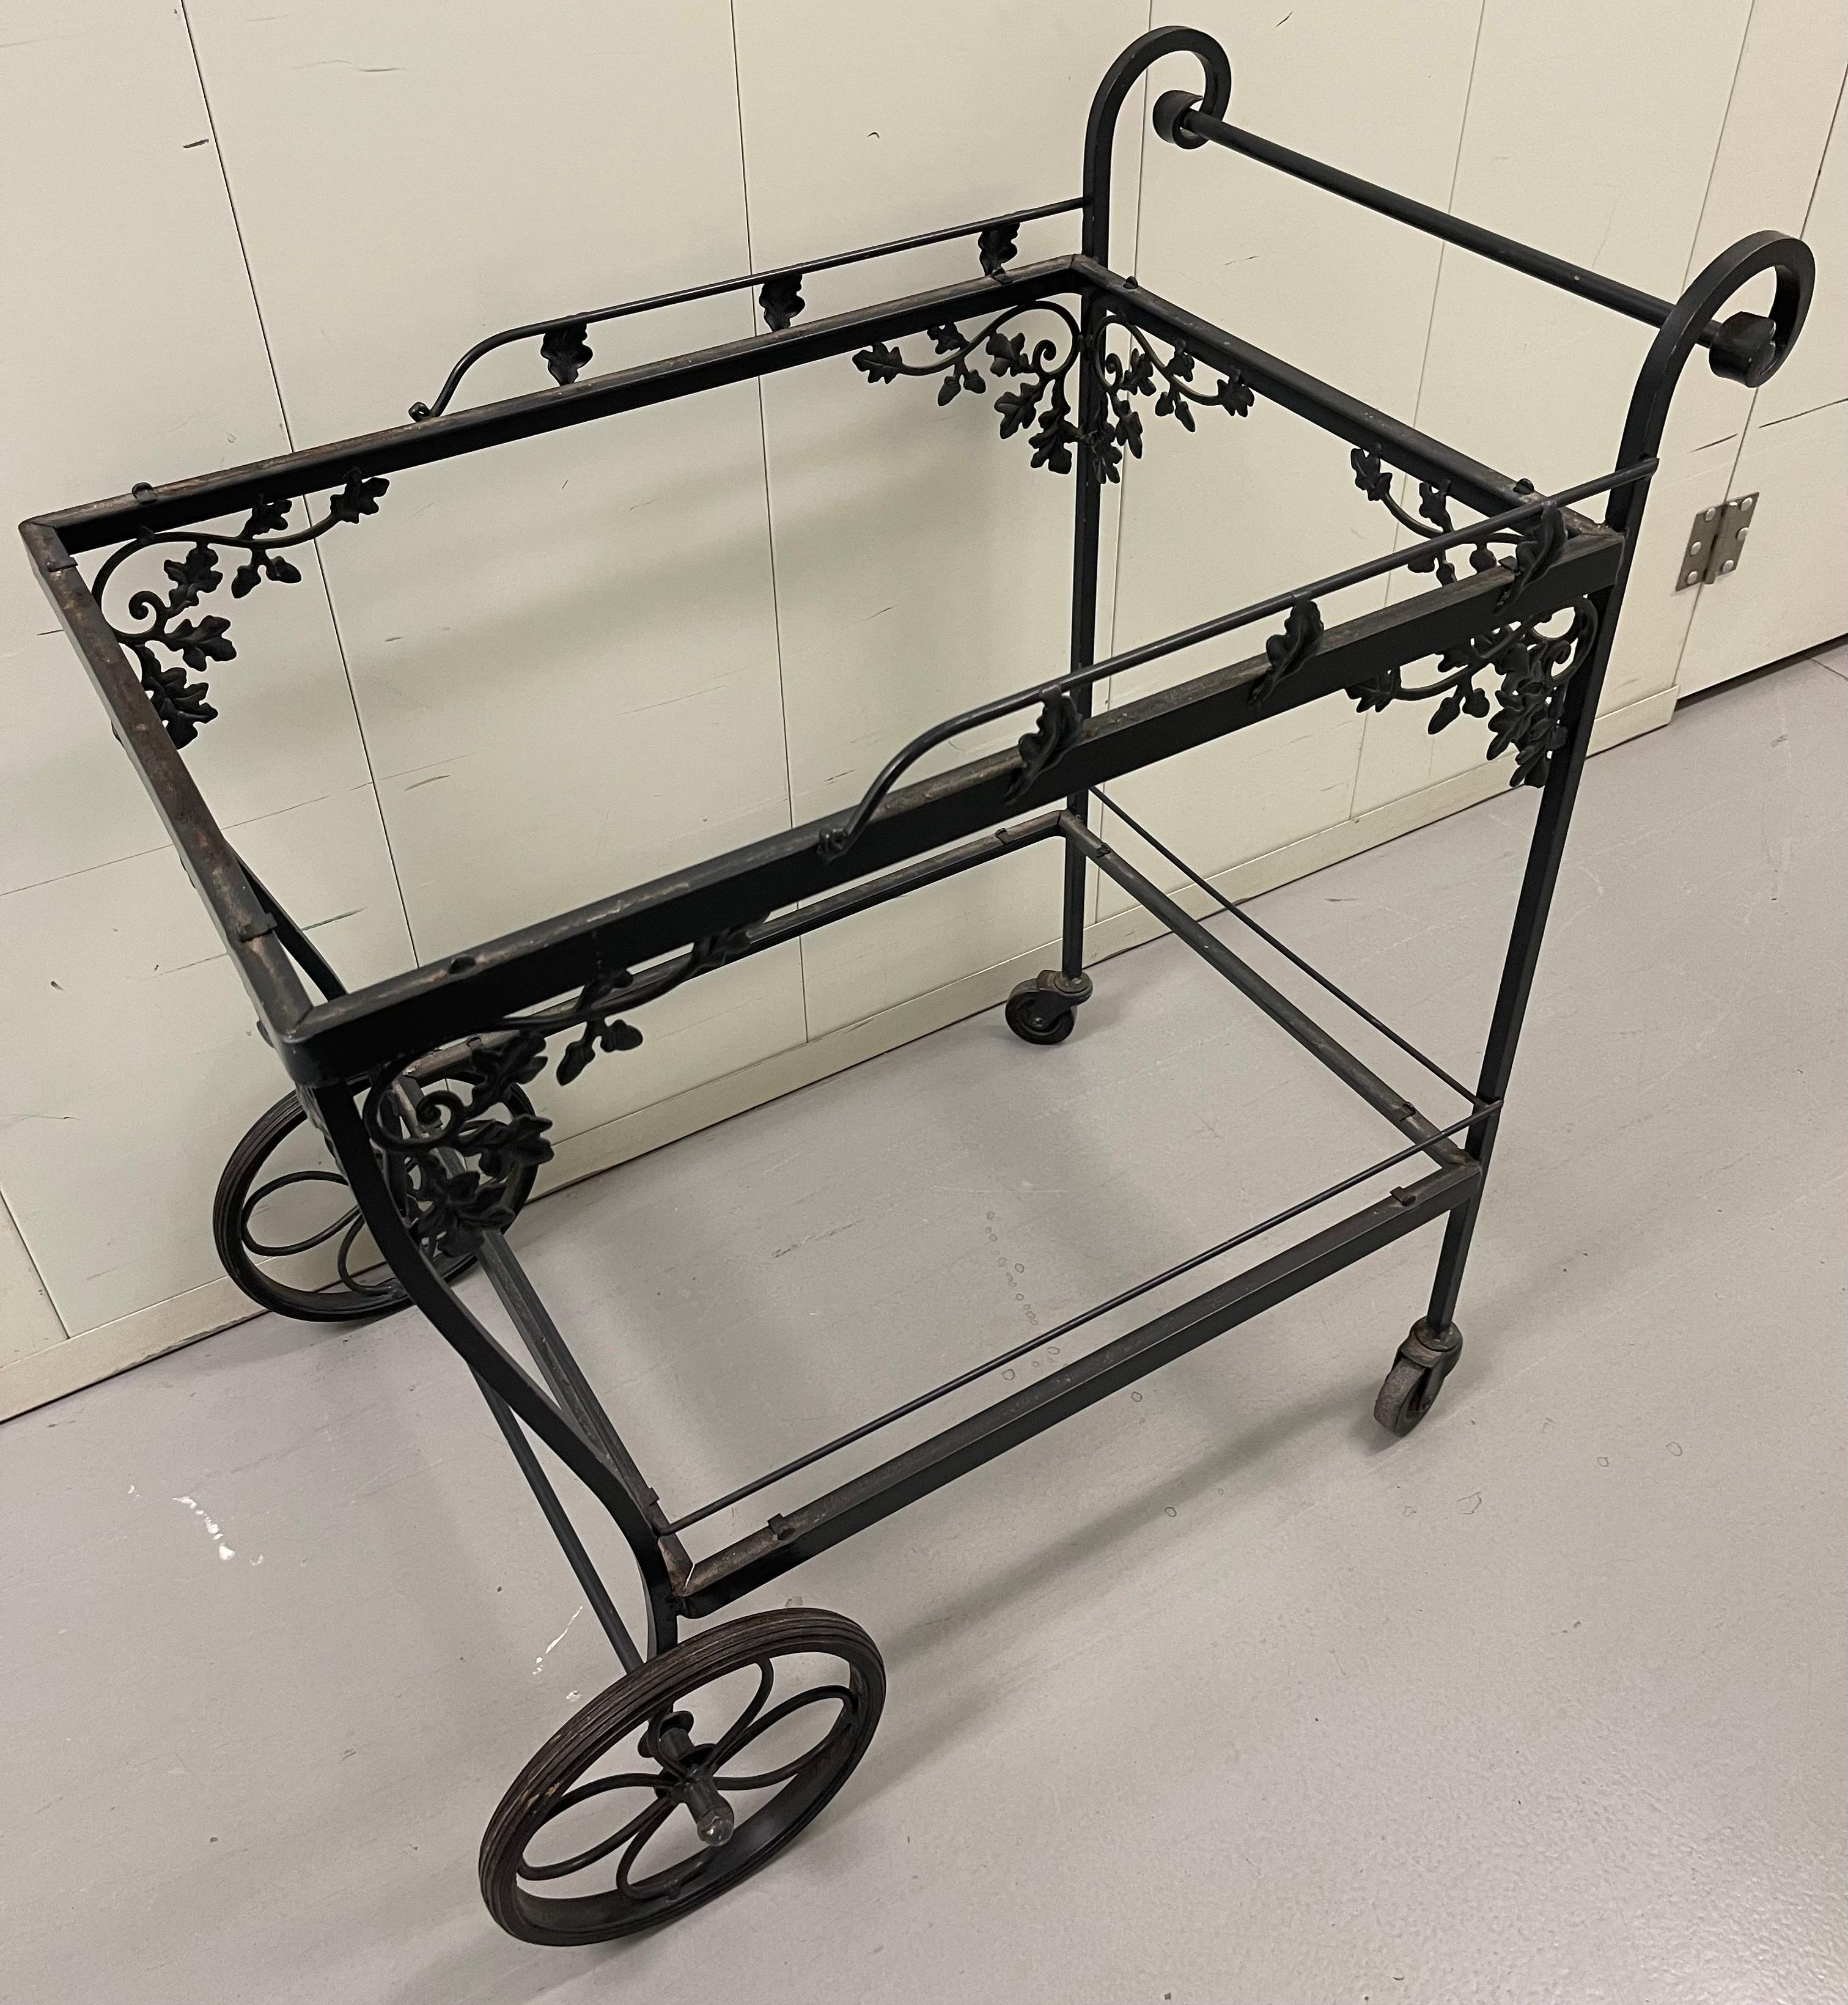 1940s Woodard Orleans pattern outdoor tea cart or bar cart. As found black painted finish. Original wheels are in working order. Glass is NOT included.